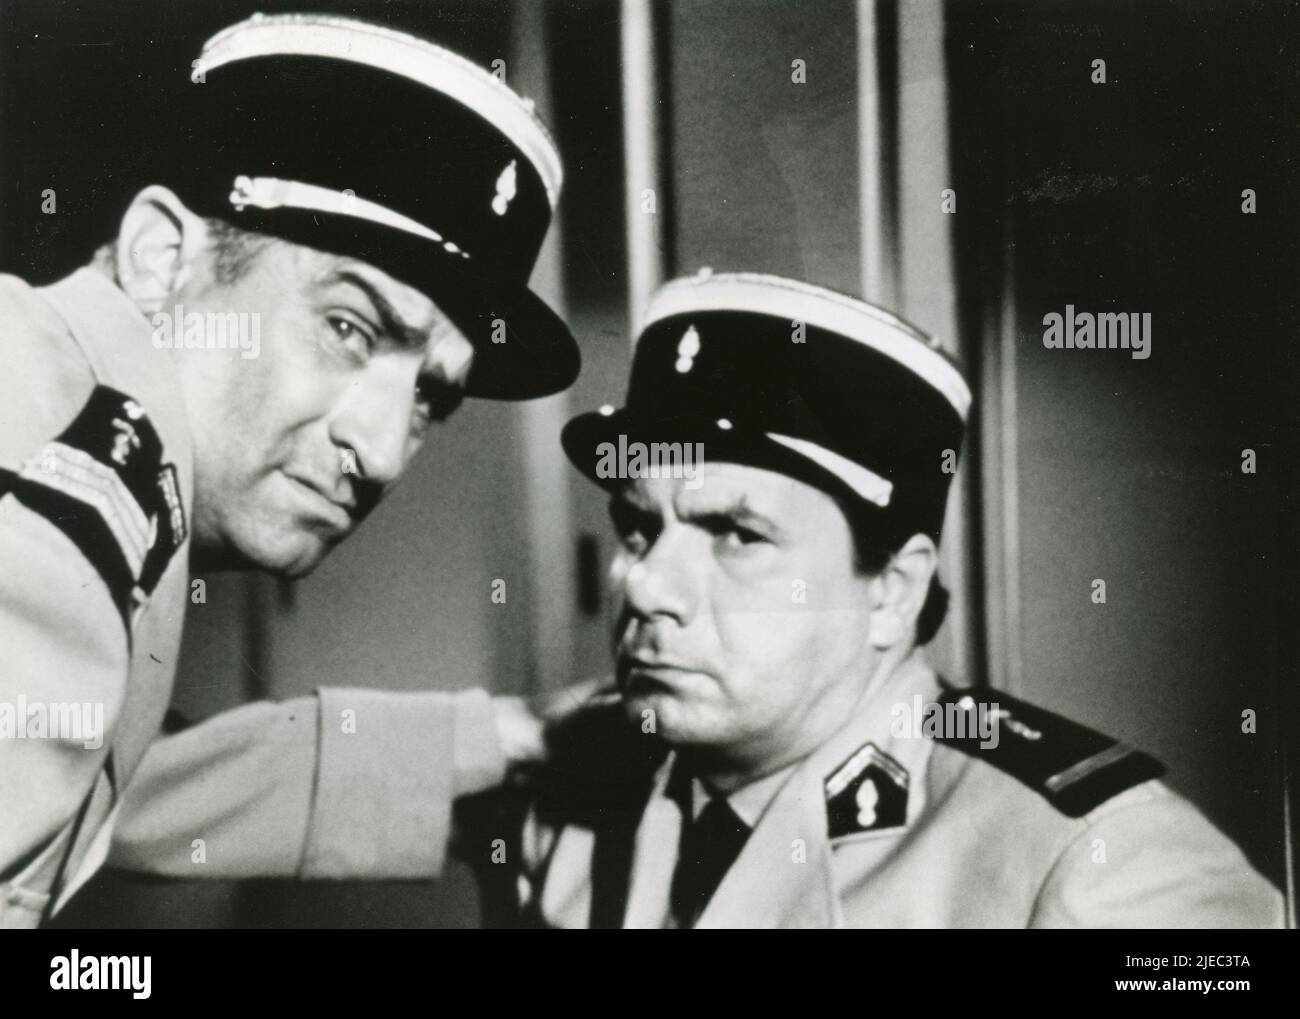 French actors Louis de Funes and Michel Galabru in the movie Gendarme in New York, France 1965 Stock Photo